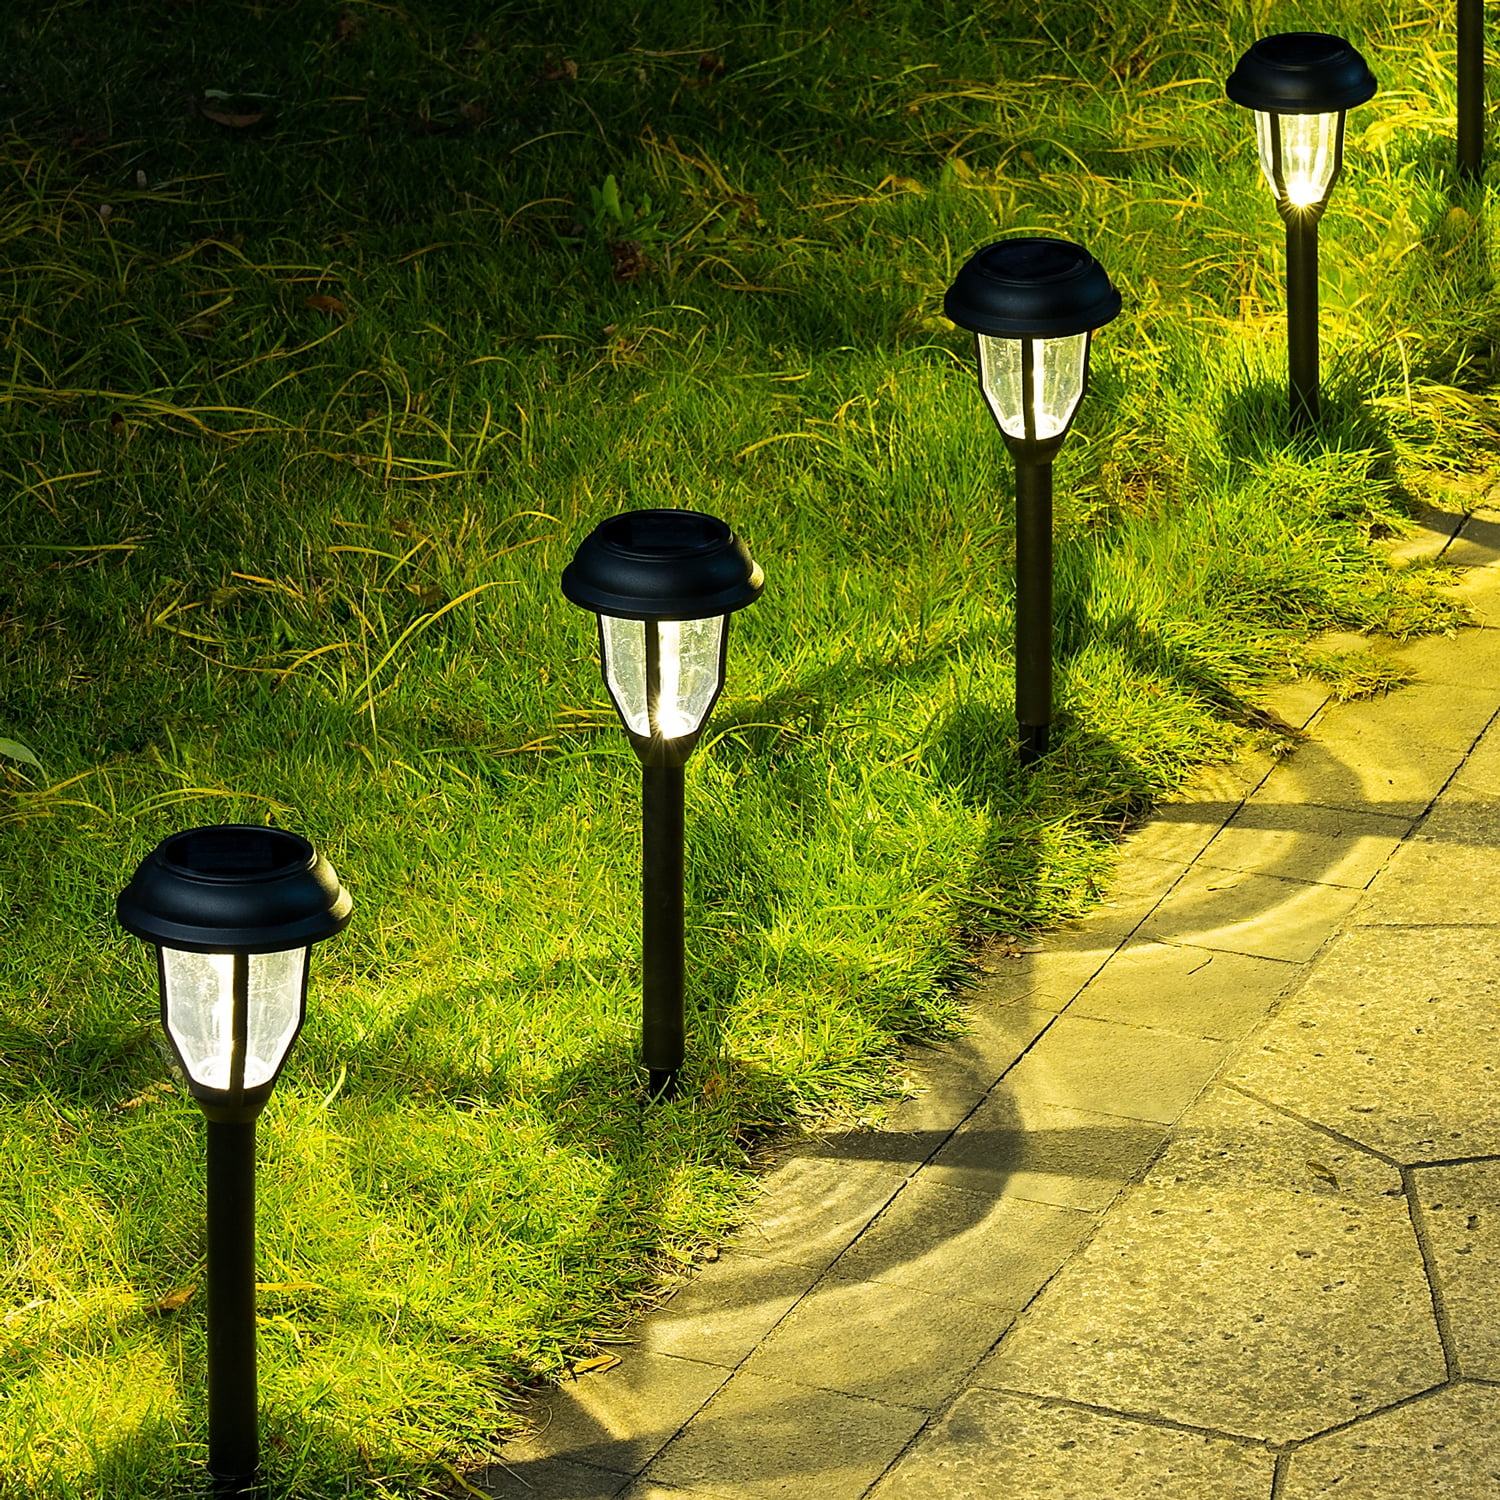 24PC LED Solar Lights Walkway Path Landscape Lawn Lamps Power Outdoor Equipment 